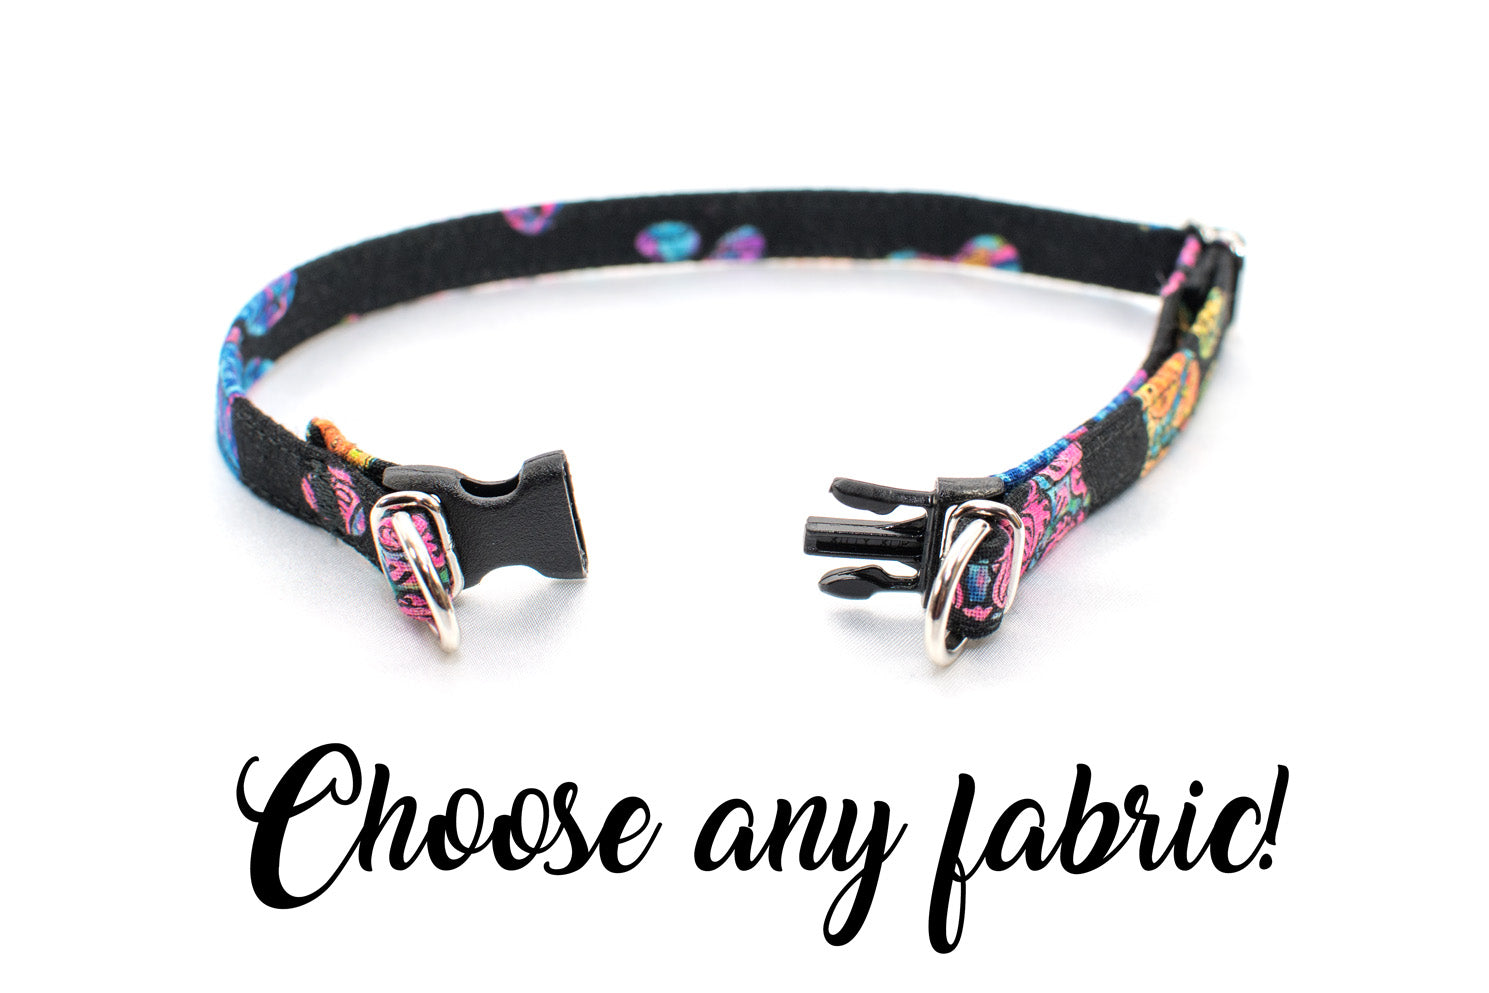 3/8" Choose-a-Fabric BreakAway Dog Collar - for small dogs - Fox Valley Dog Collars